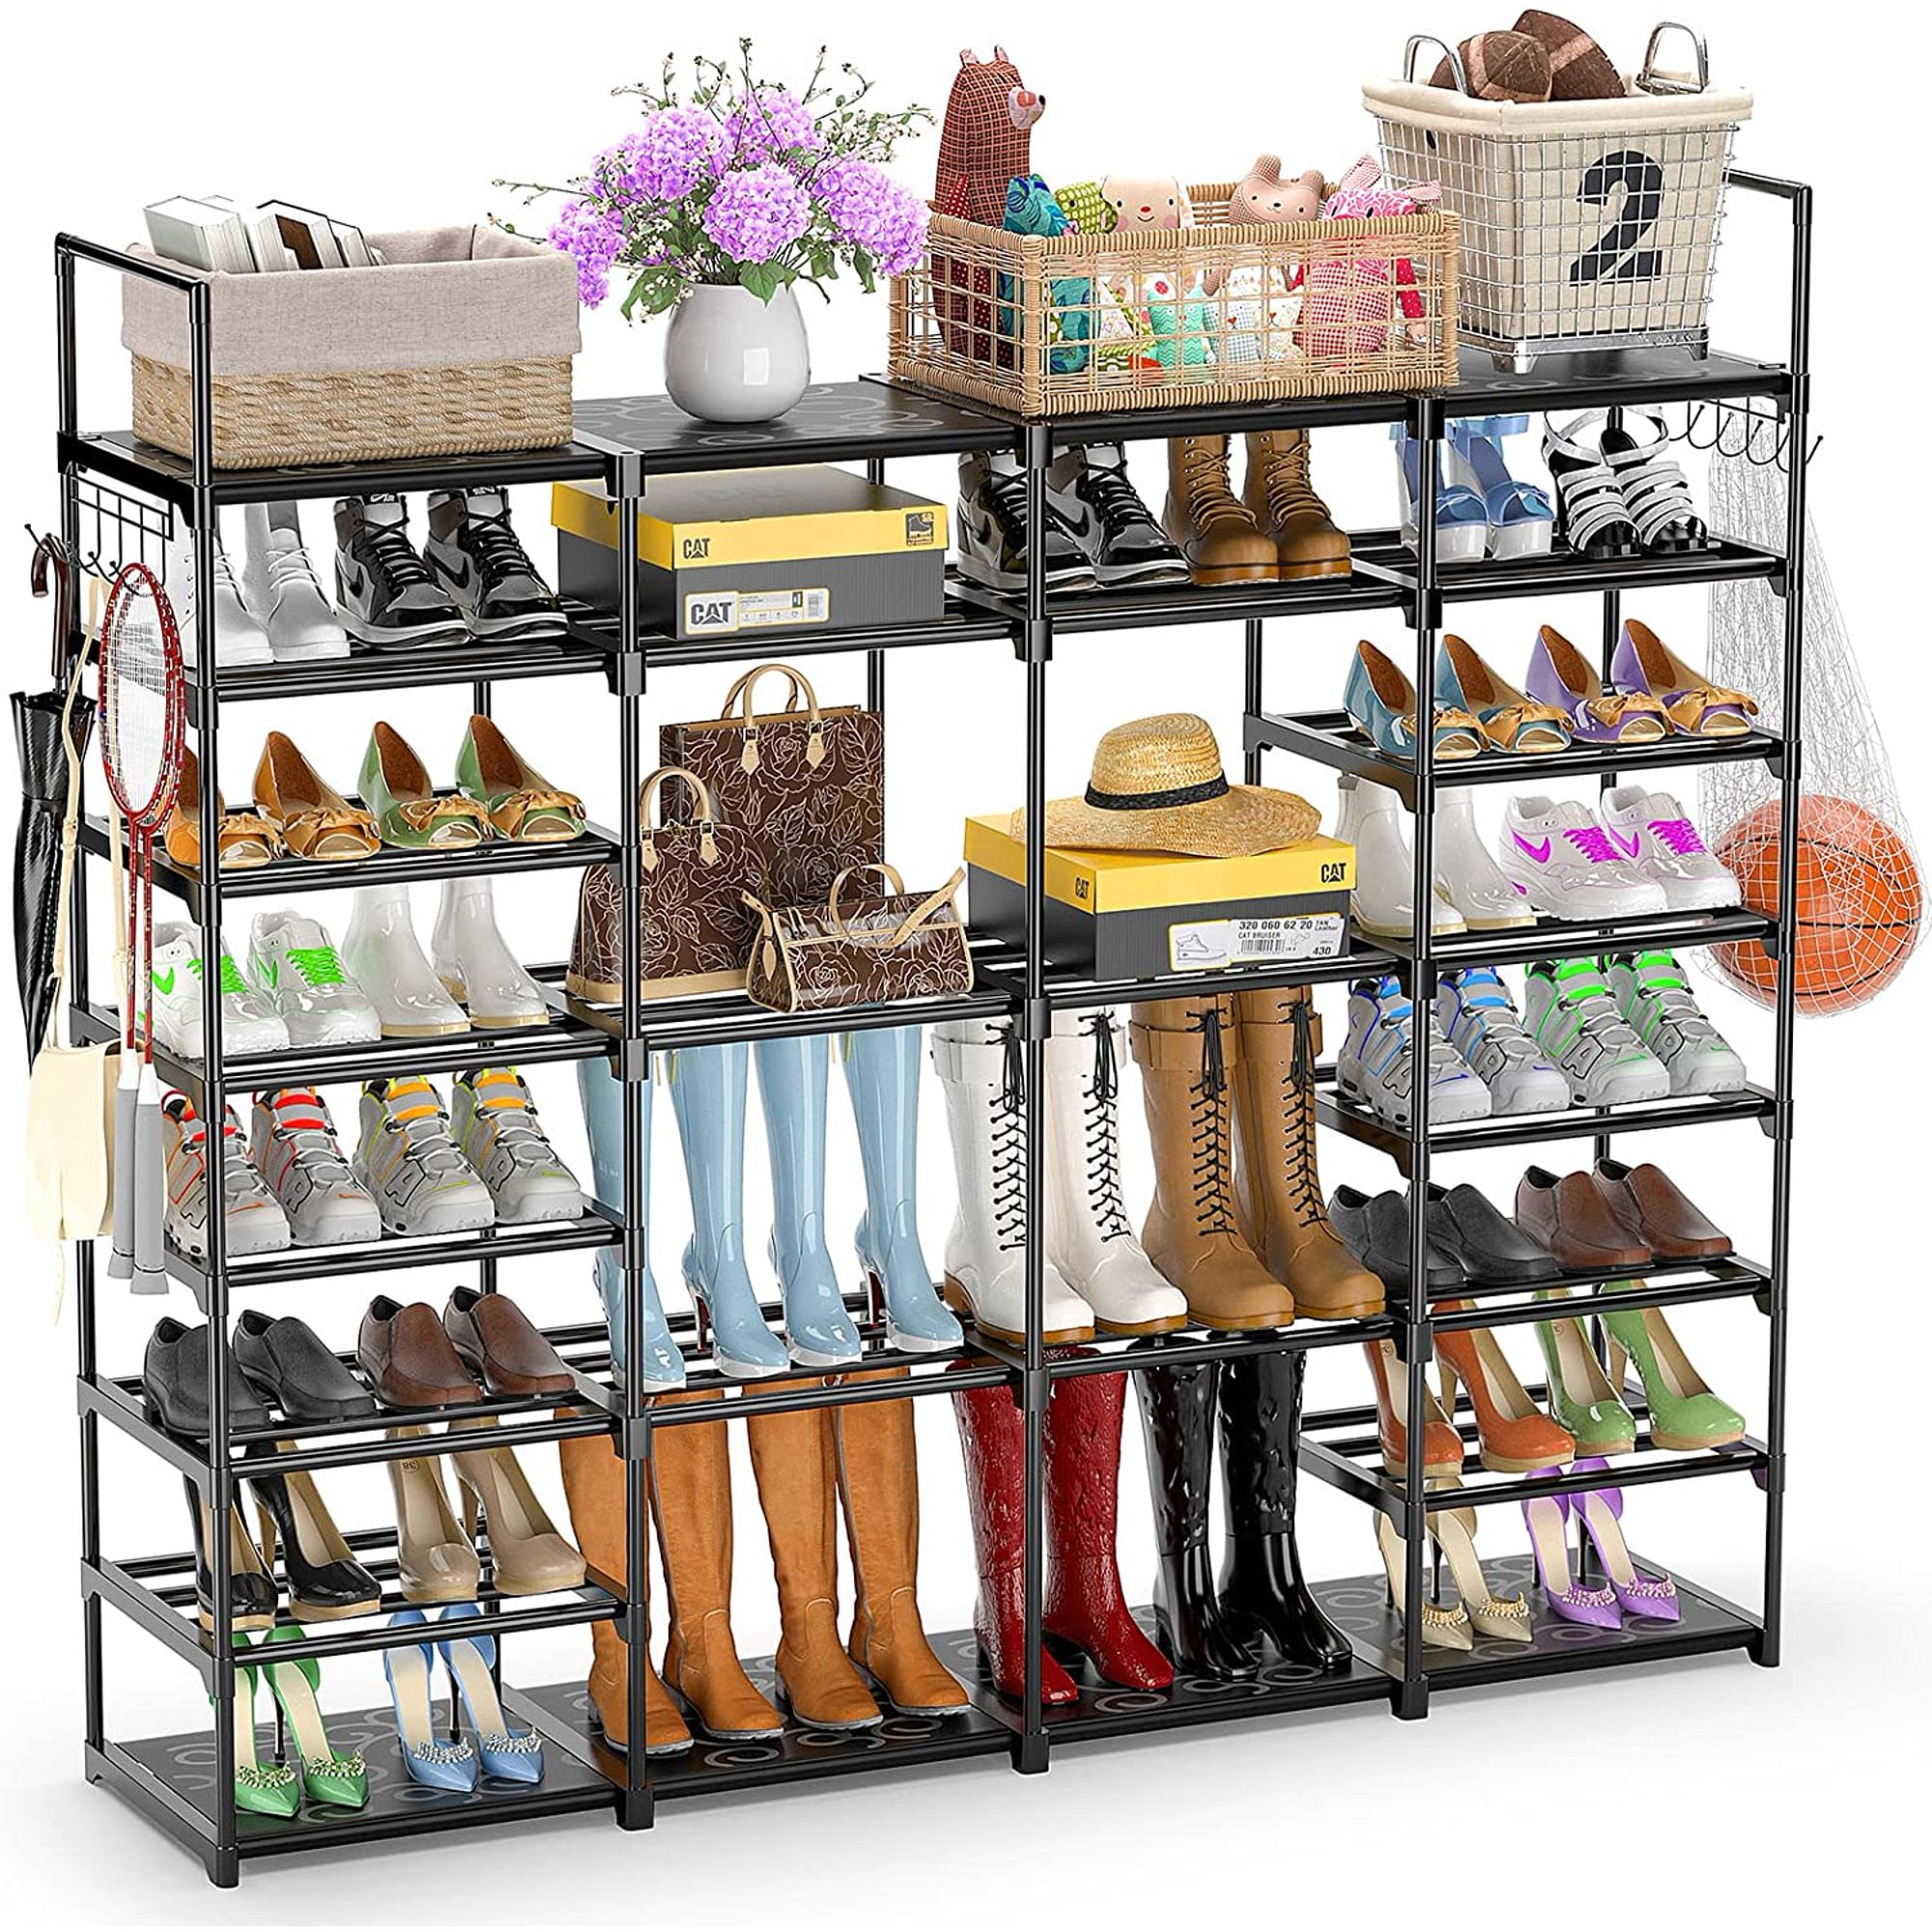  XIHAMA 8-Tier Big Size Metal Shoe Rack, Sturdy Shelf Organizer  for Entryway,Garage, Bedroom,Closet,Holds 26-32 Pairs of Shoes,with 2 Pack  Side Hooks : Home & Kitchen